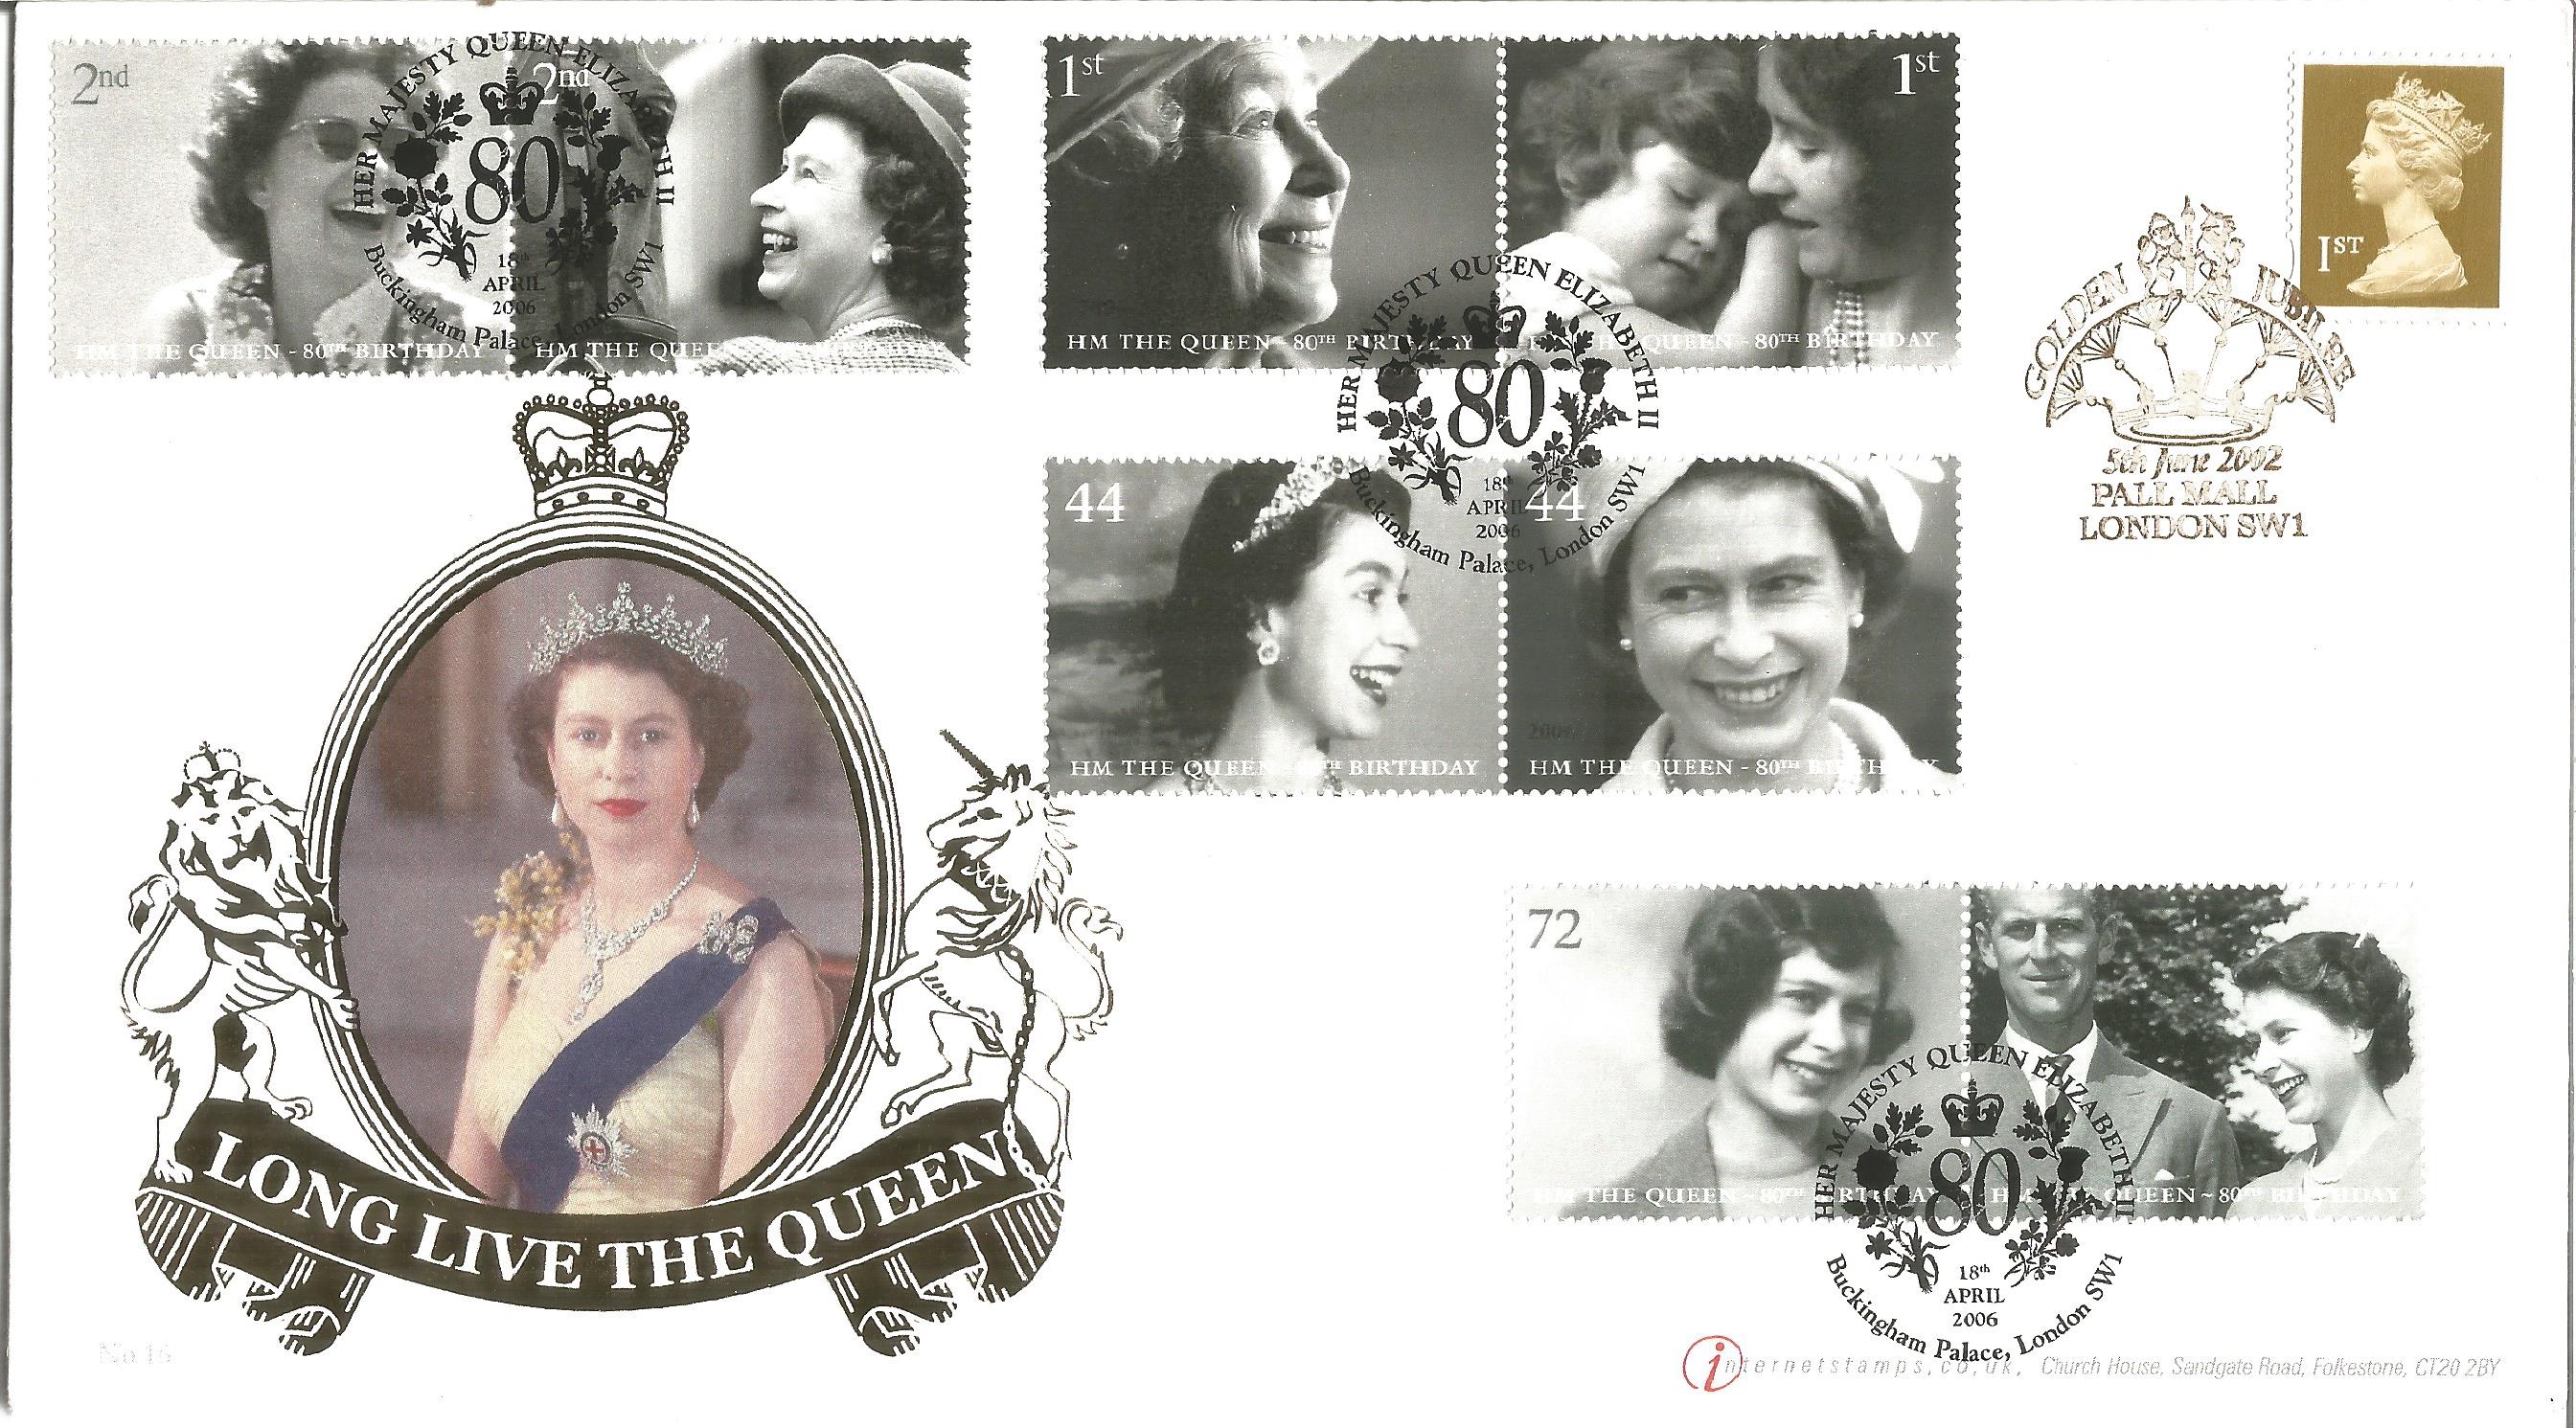 Long Live The Queen Golden Jubilee 1952 - 2002 unsigned Internetstamps official FDC cover No 181